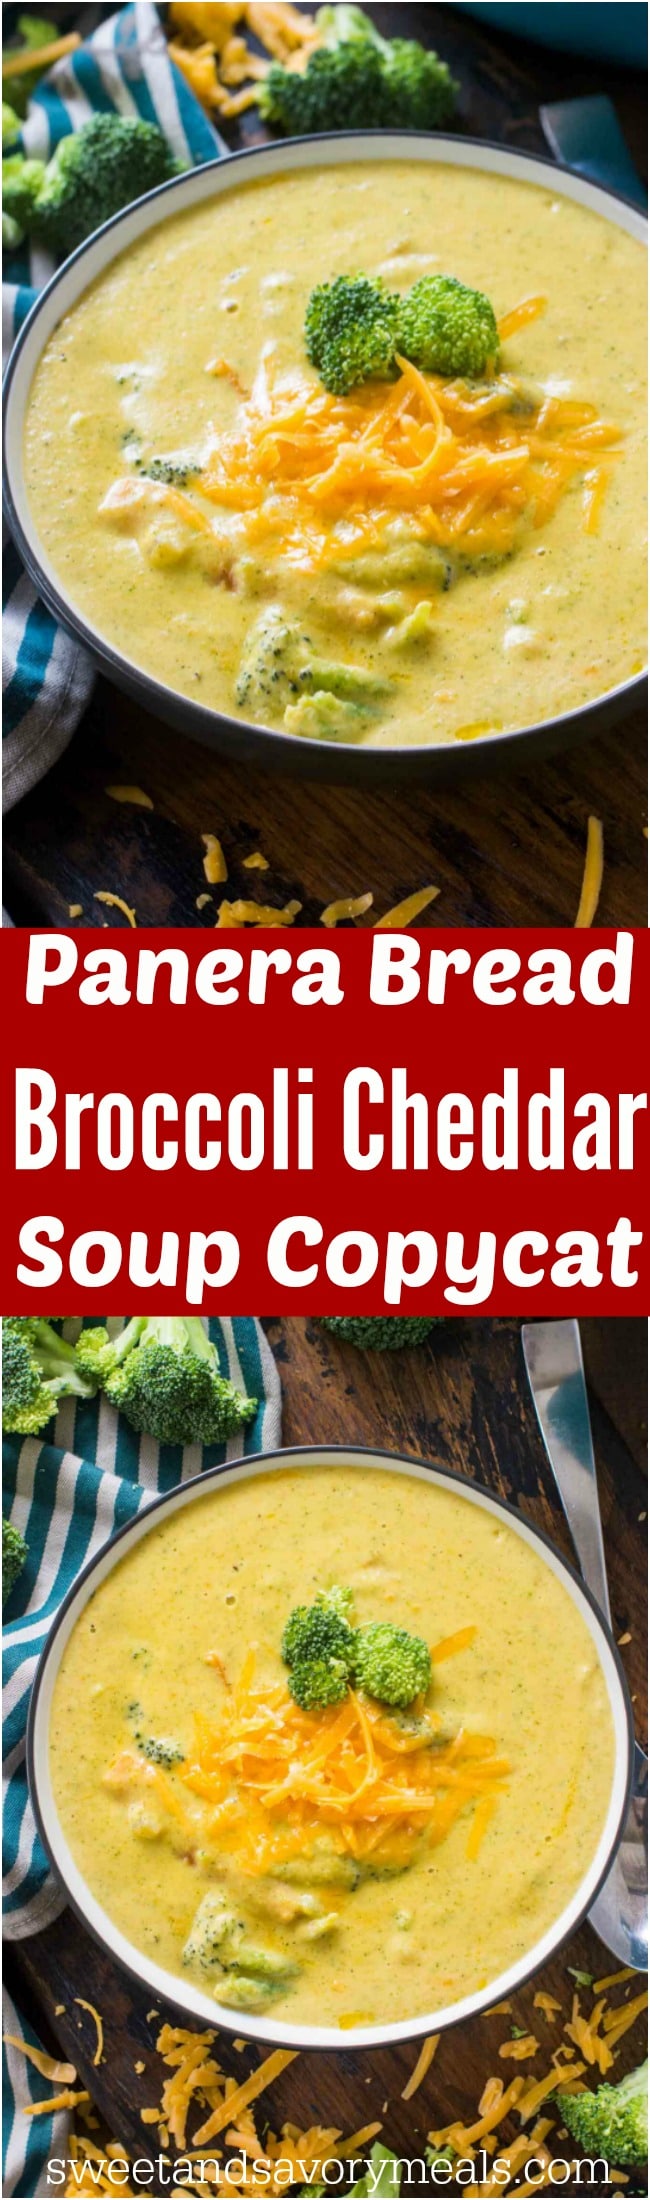 Creamy Panera Bread Broccoli Cheddar Soup Copycat is the perfect recipe of your favorite creamy and cheesy soup, that you can now easily make at home.